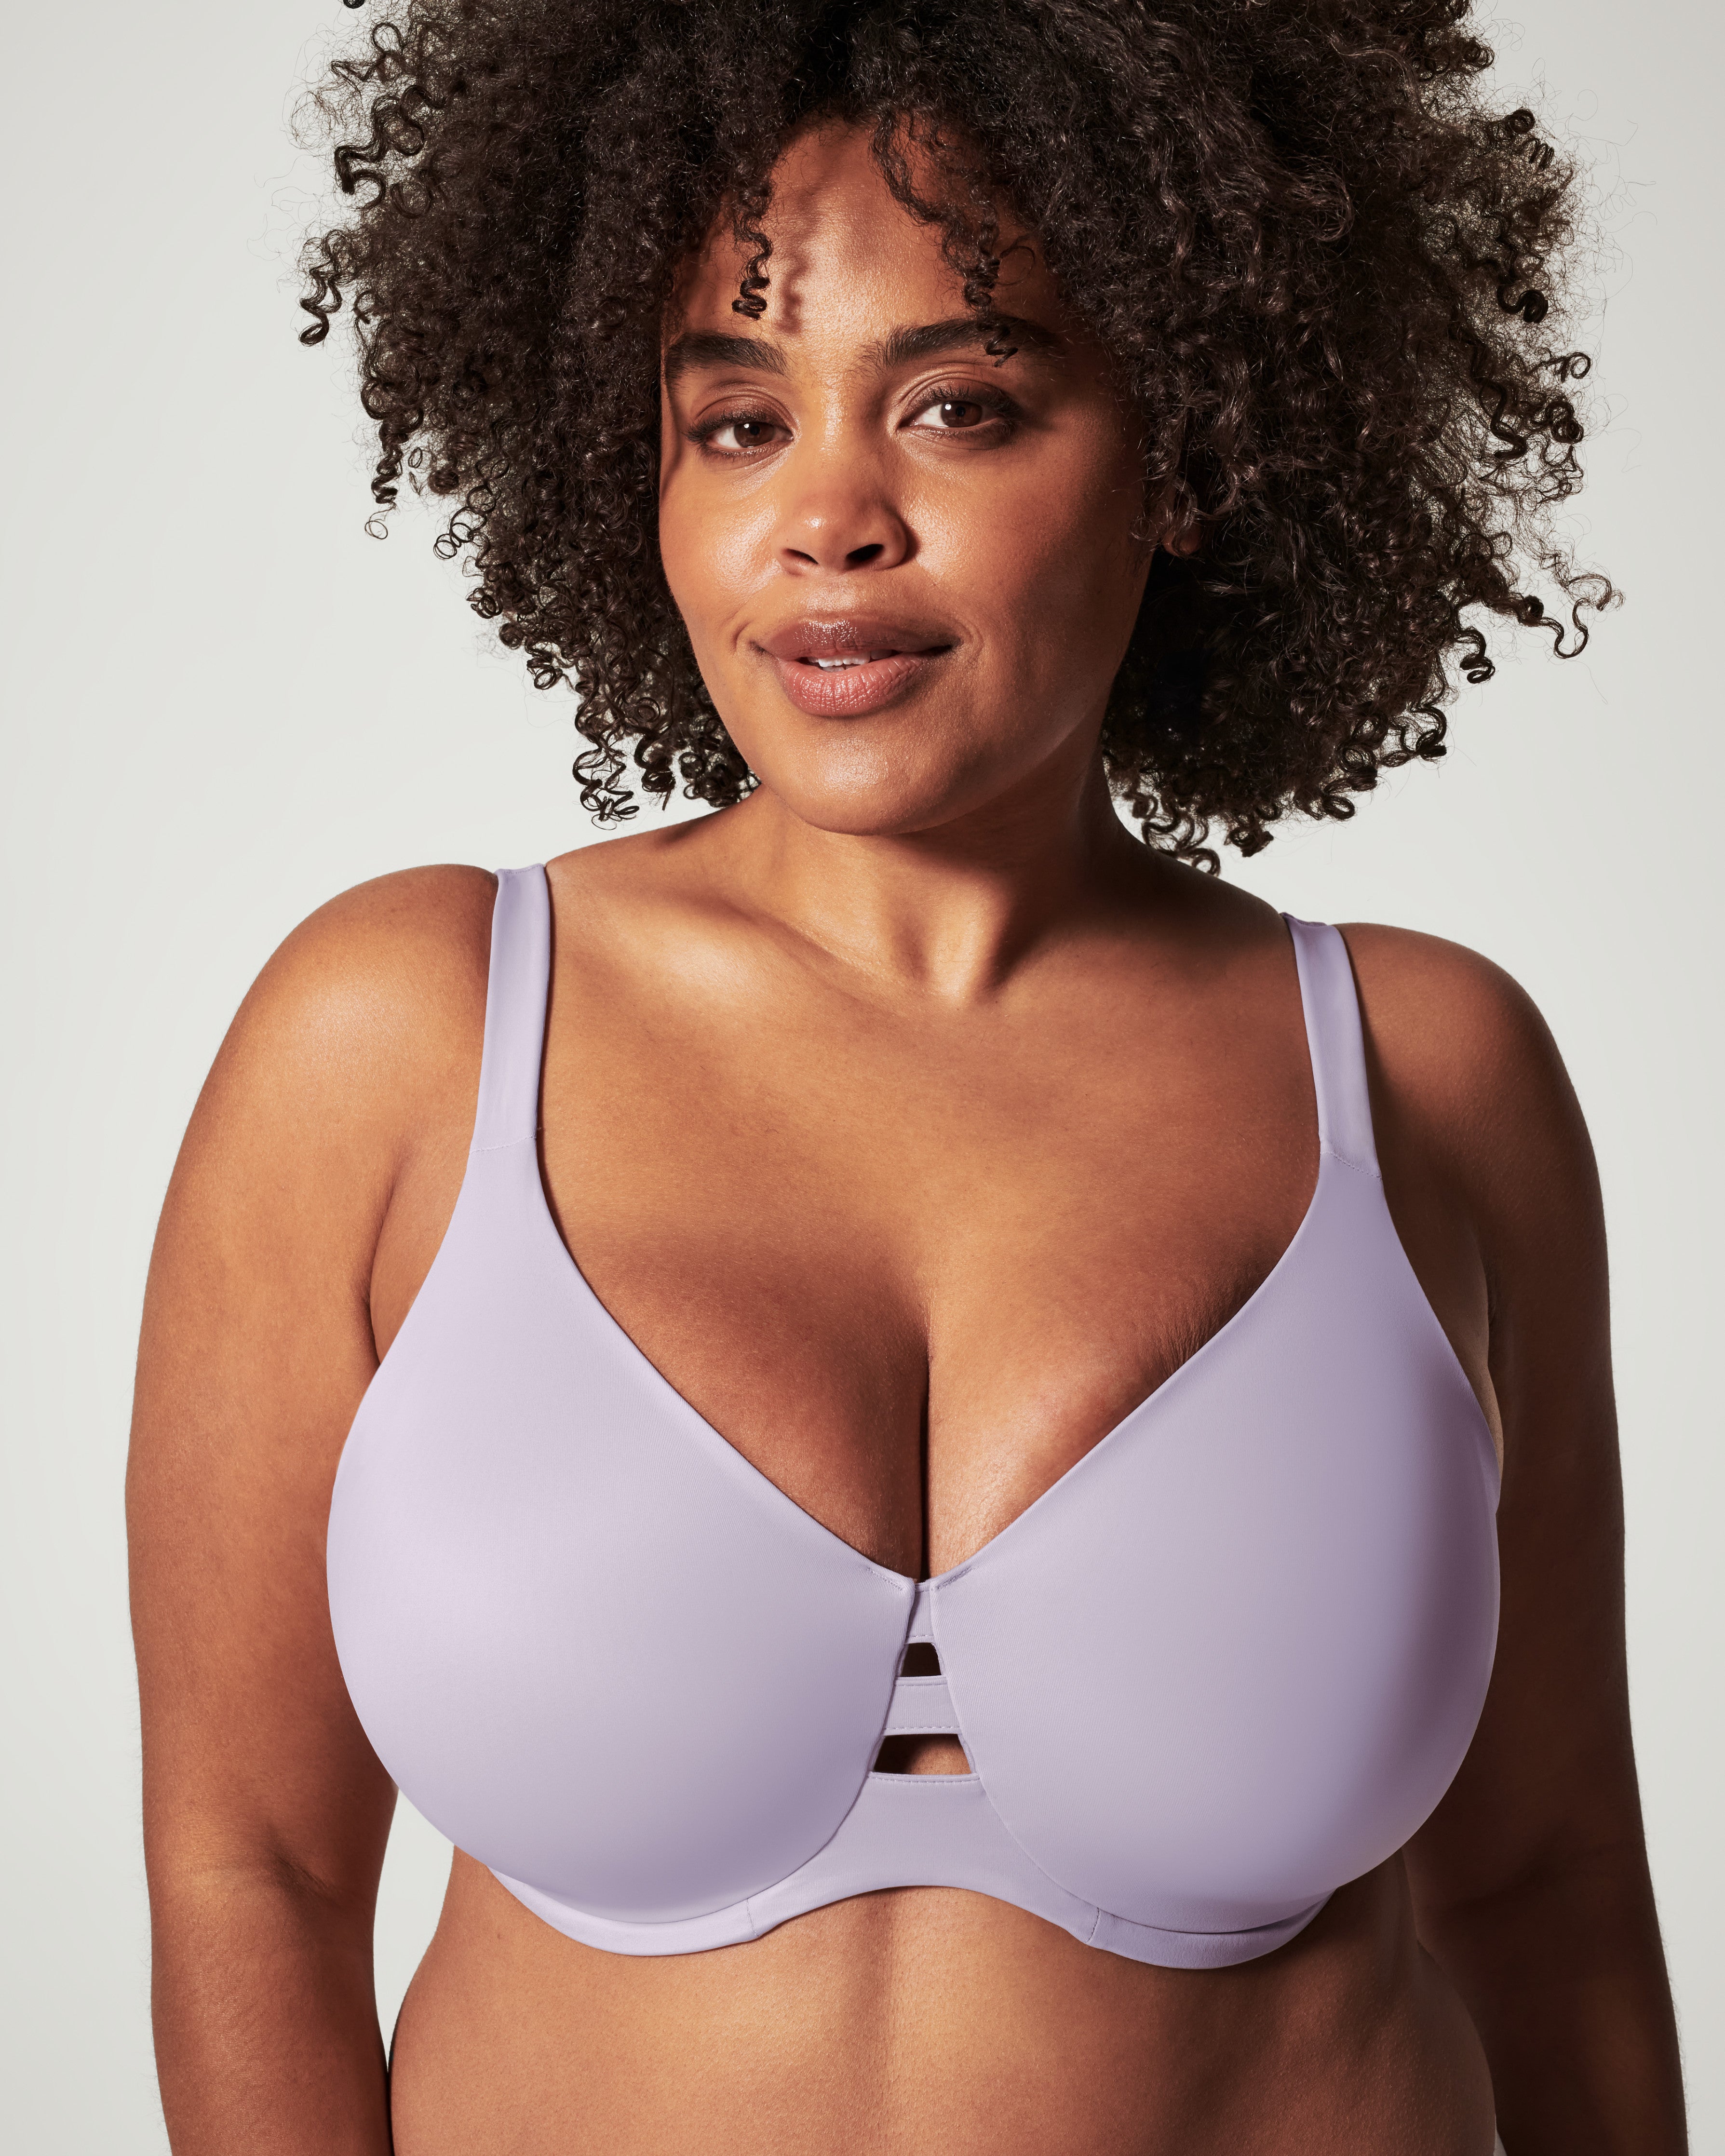 SPANX Countries Bras for Women